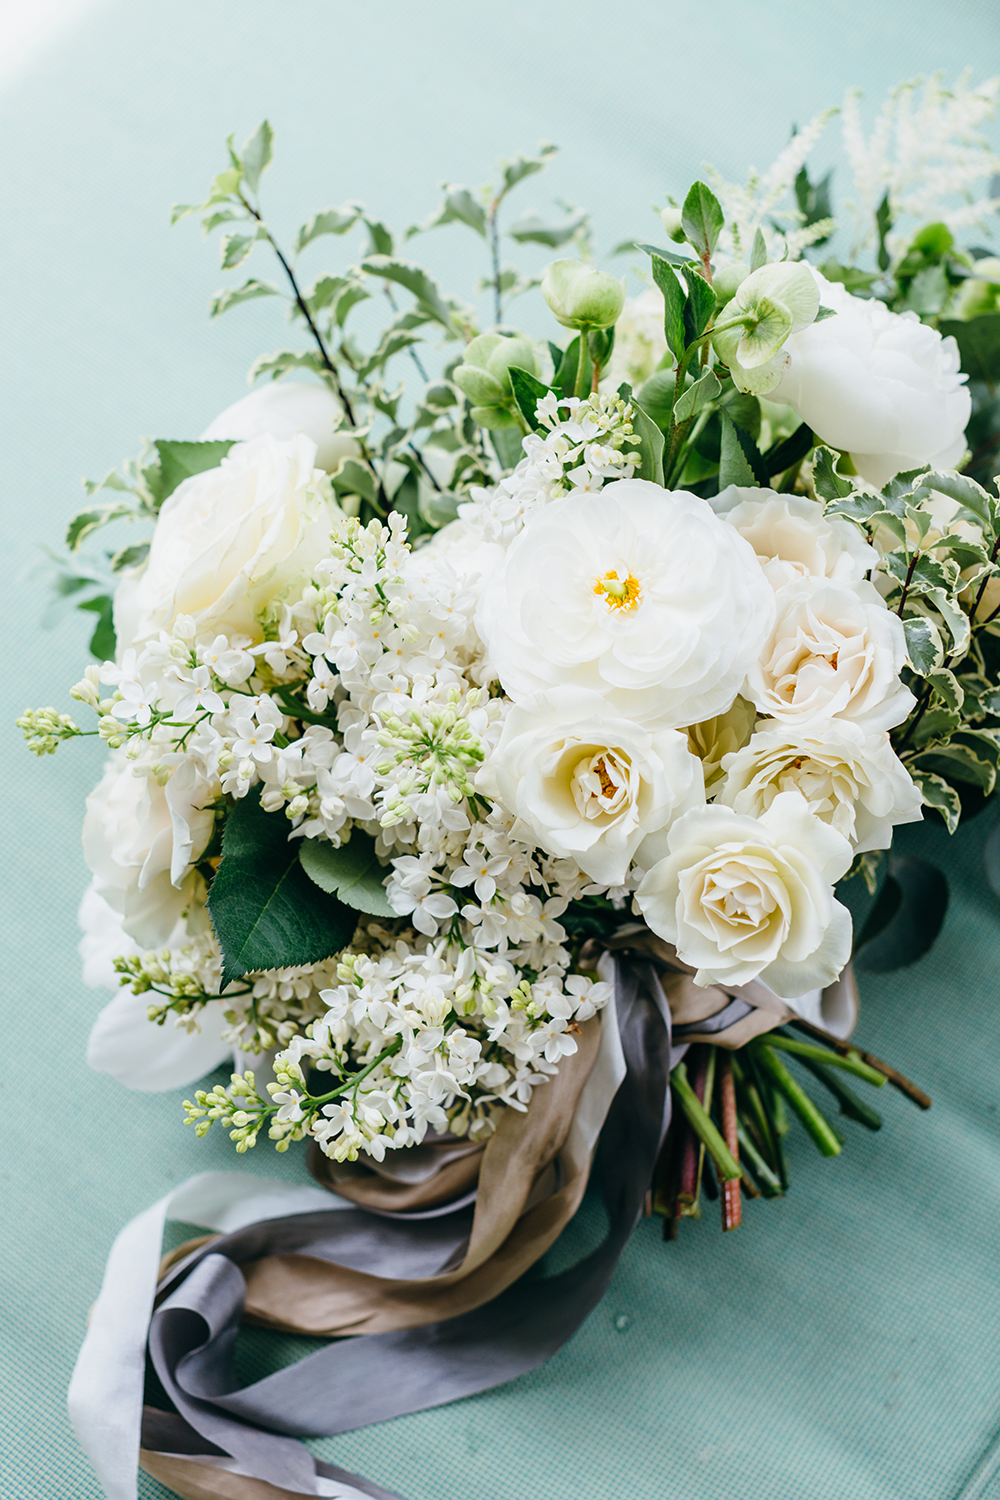 woodsy white florals (With images) Bride flowers, Cream